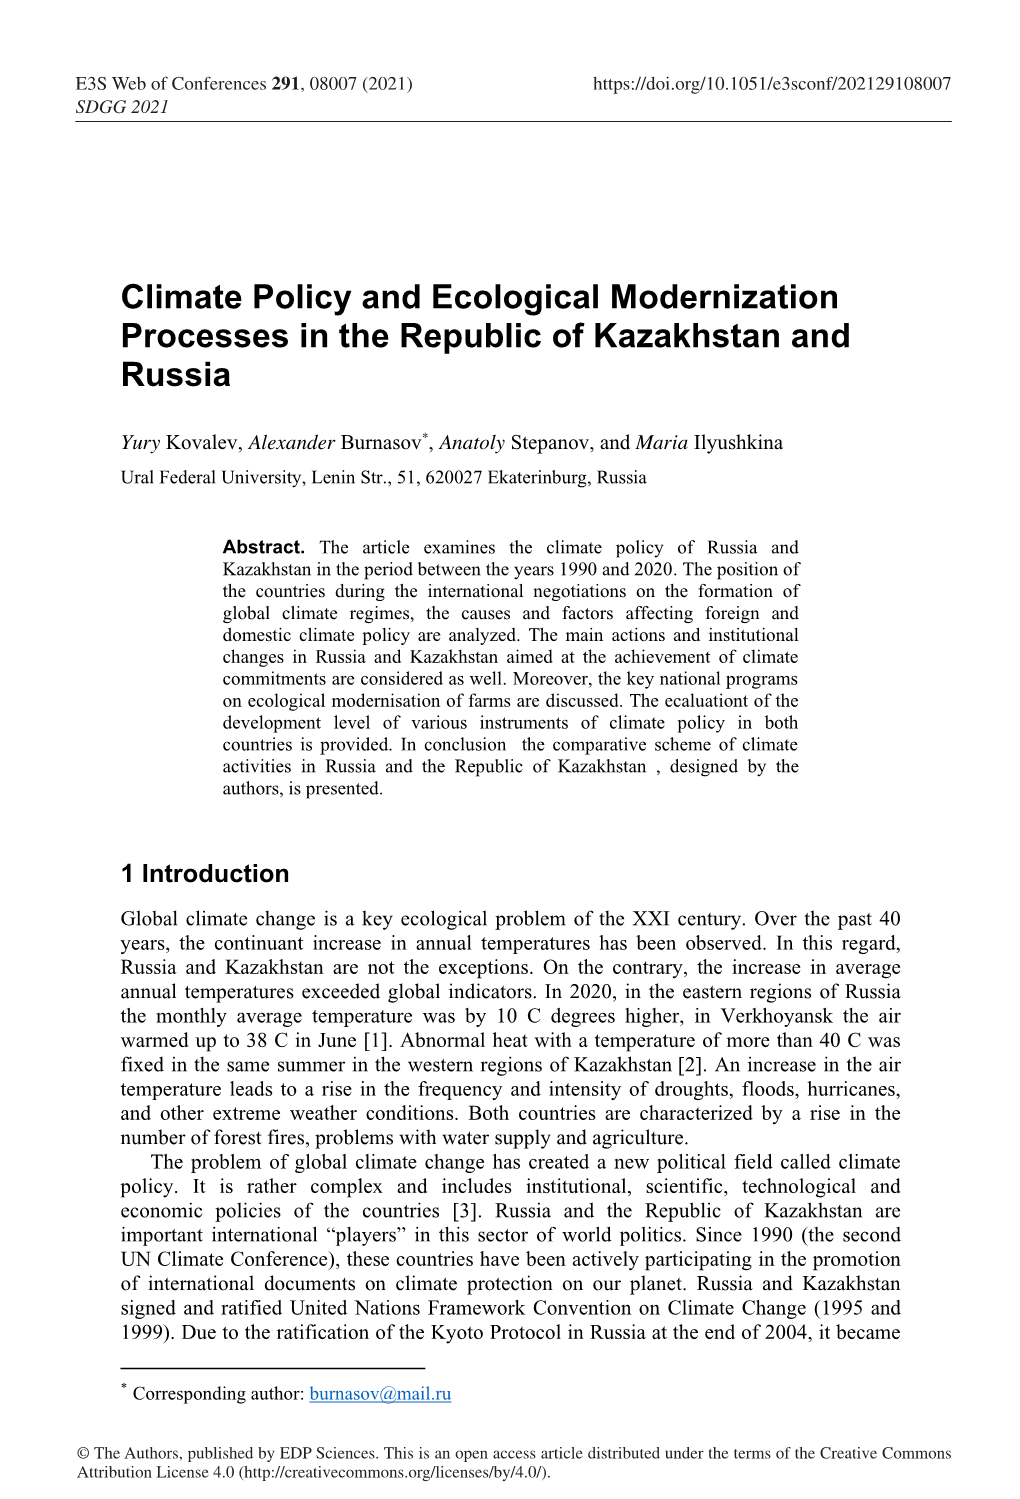 Climate Policy and Ecological Modernization Processes in the Republic of Kazakhstan and Russia